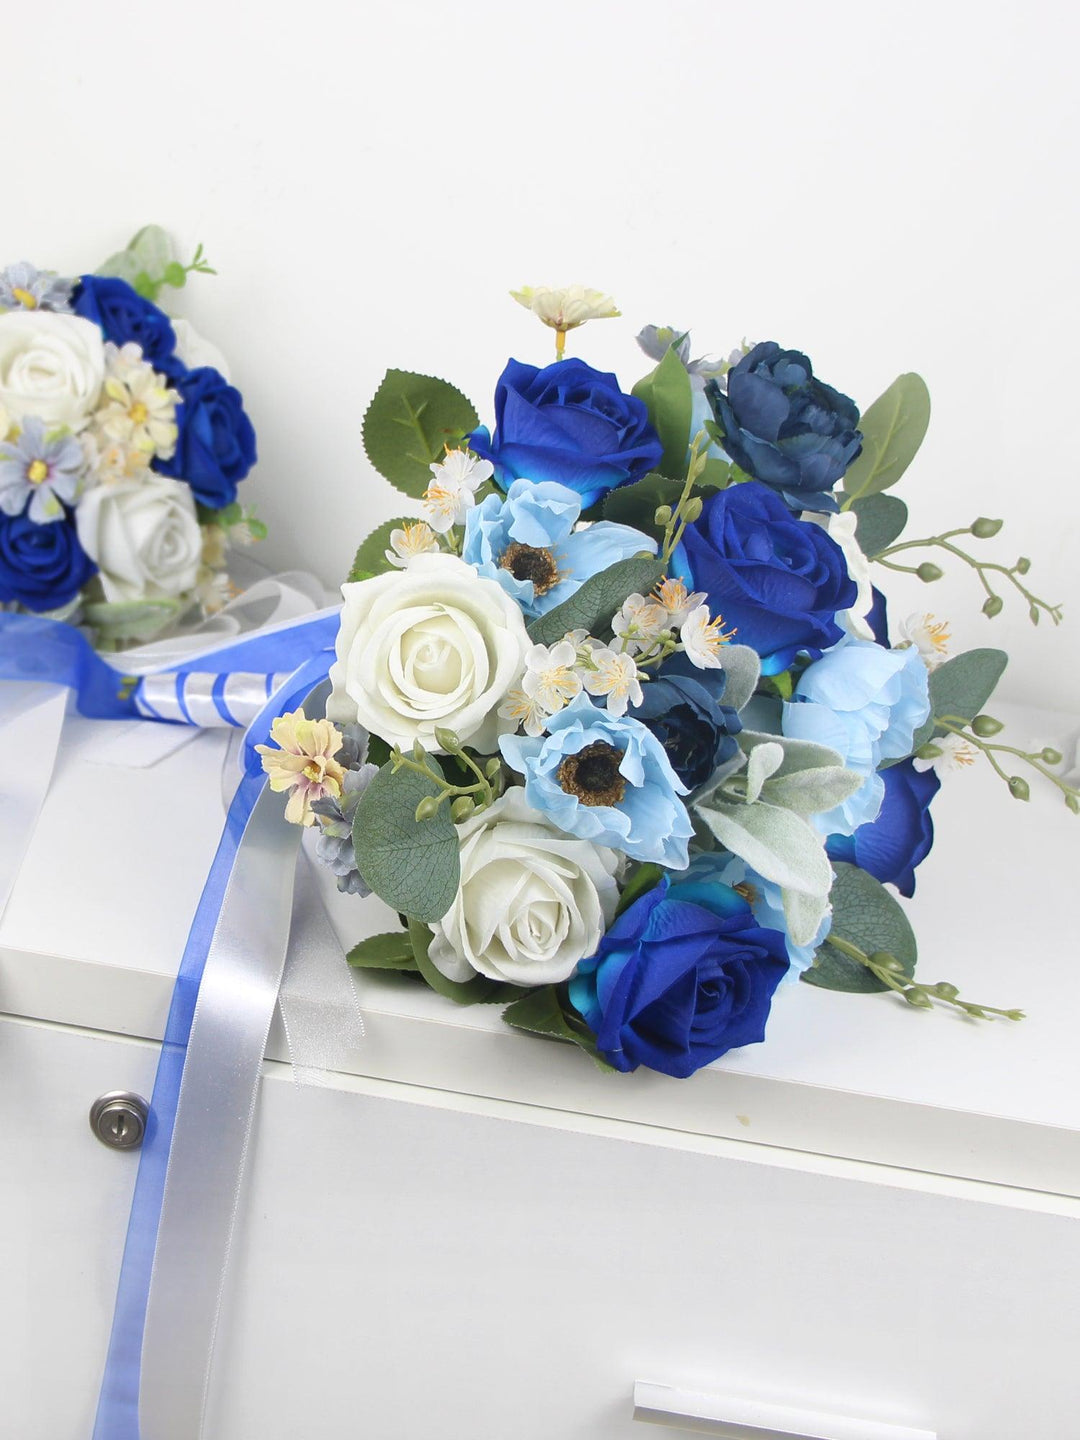 How to Design a Wedding Bouquet with a Pop of Color? - Rinlong Flower